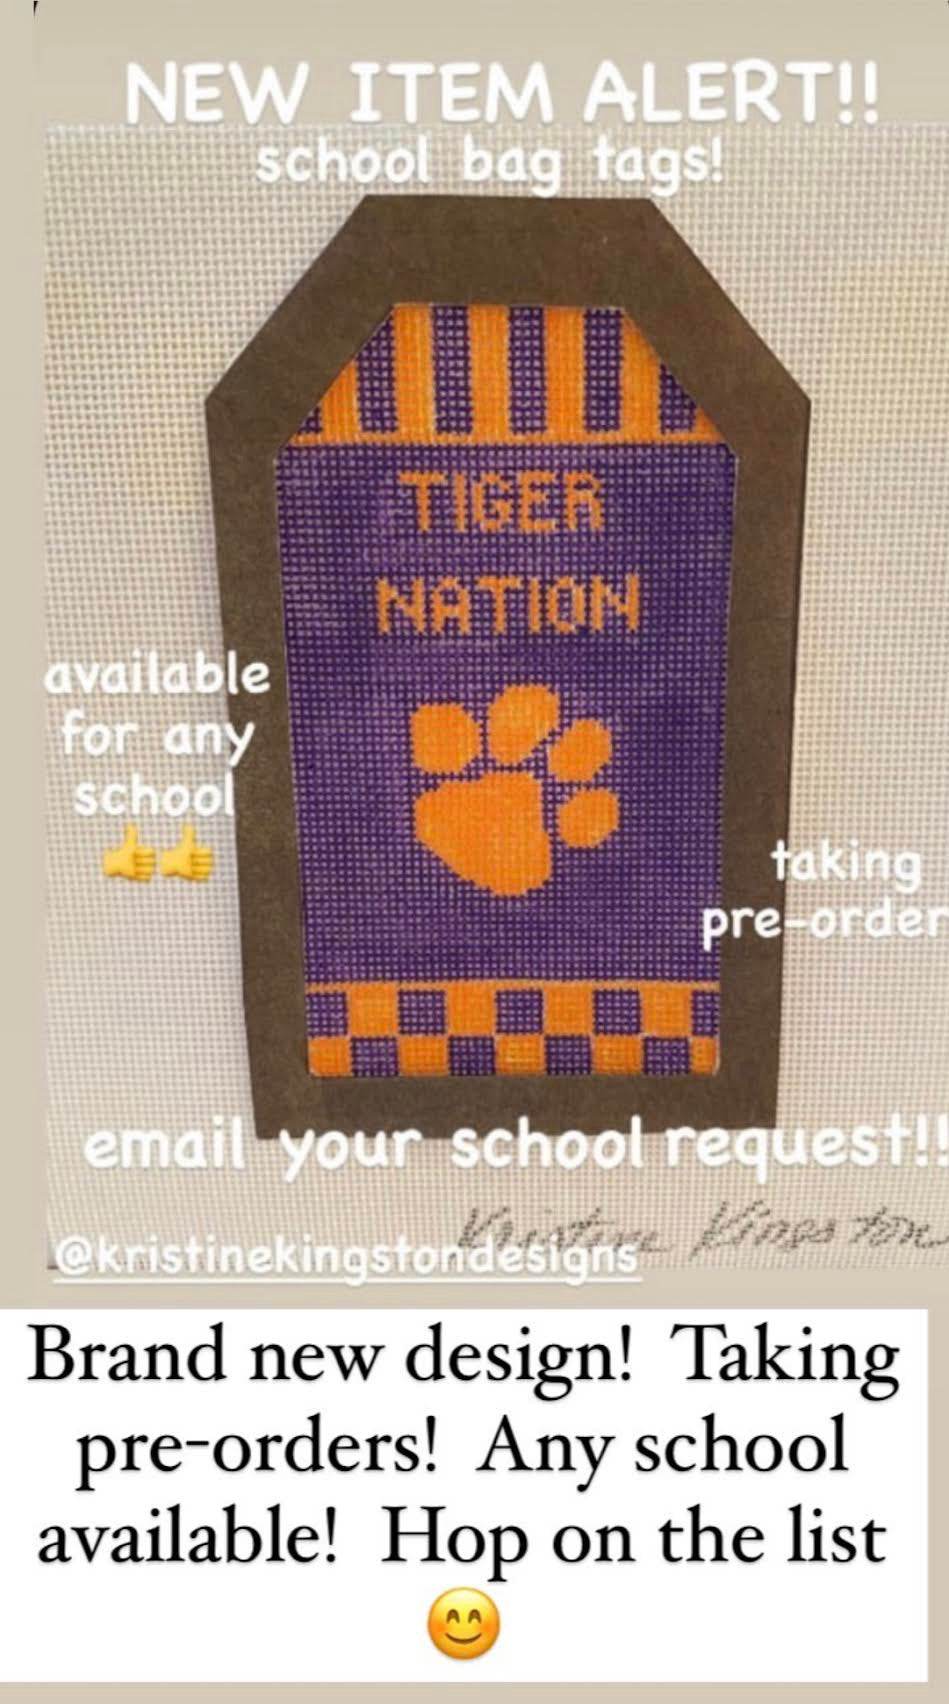 Kristine Kingston School Tags - specify your school in comments